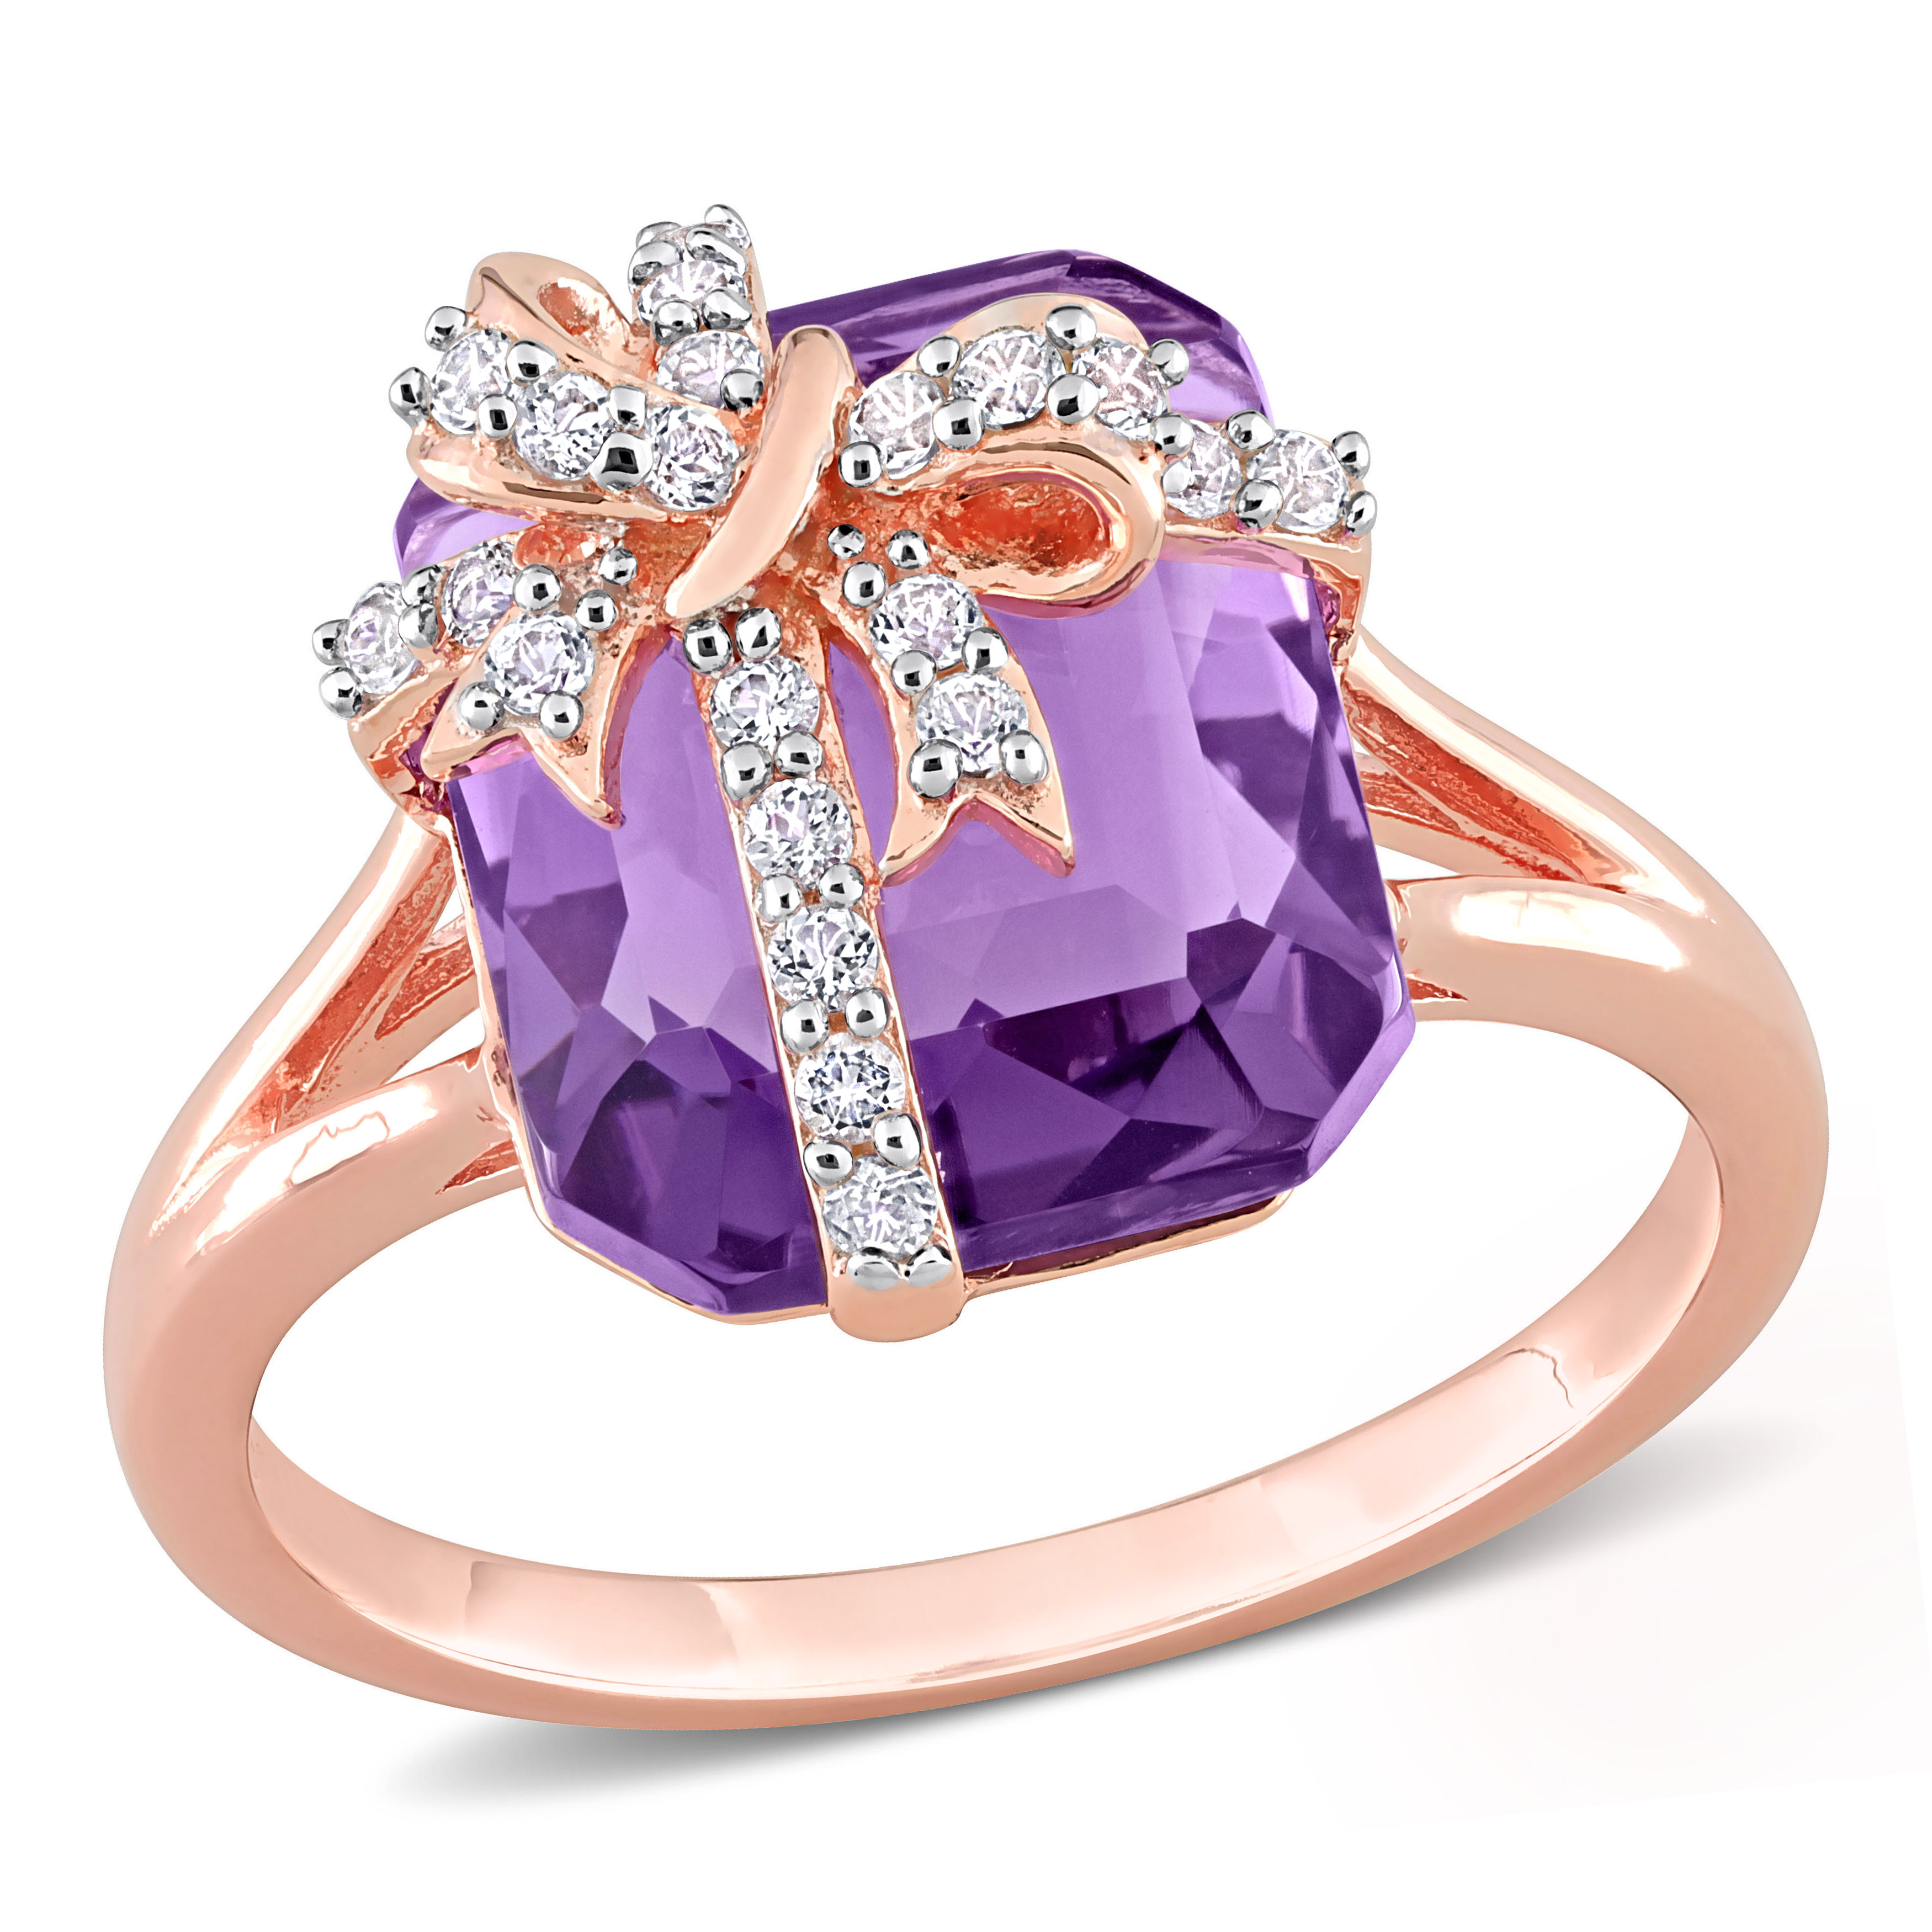 6 3/4 CT TGW Amethyst and White Topaz Ring in Rose Plated Sterling Silver